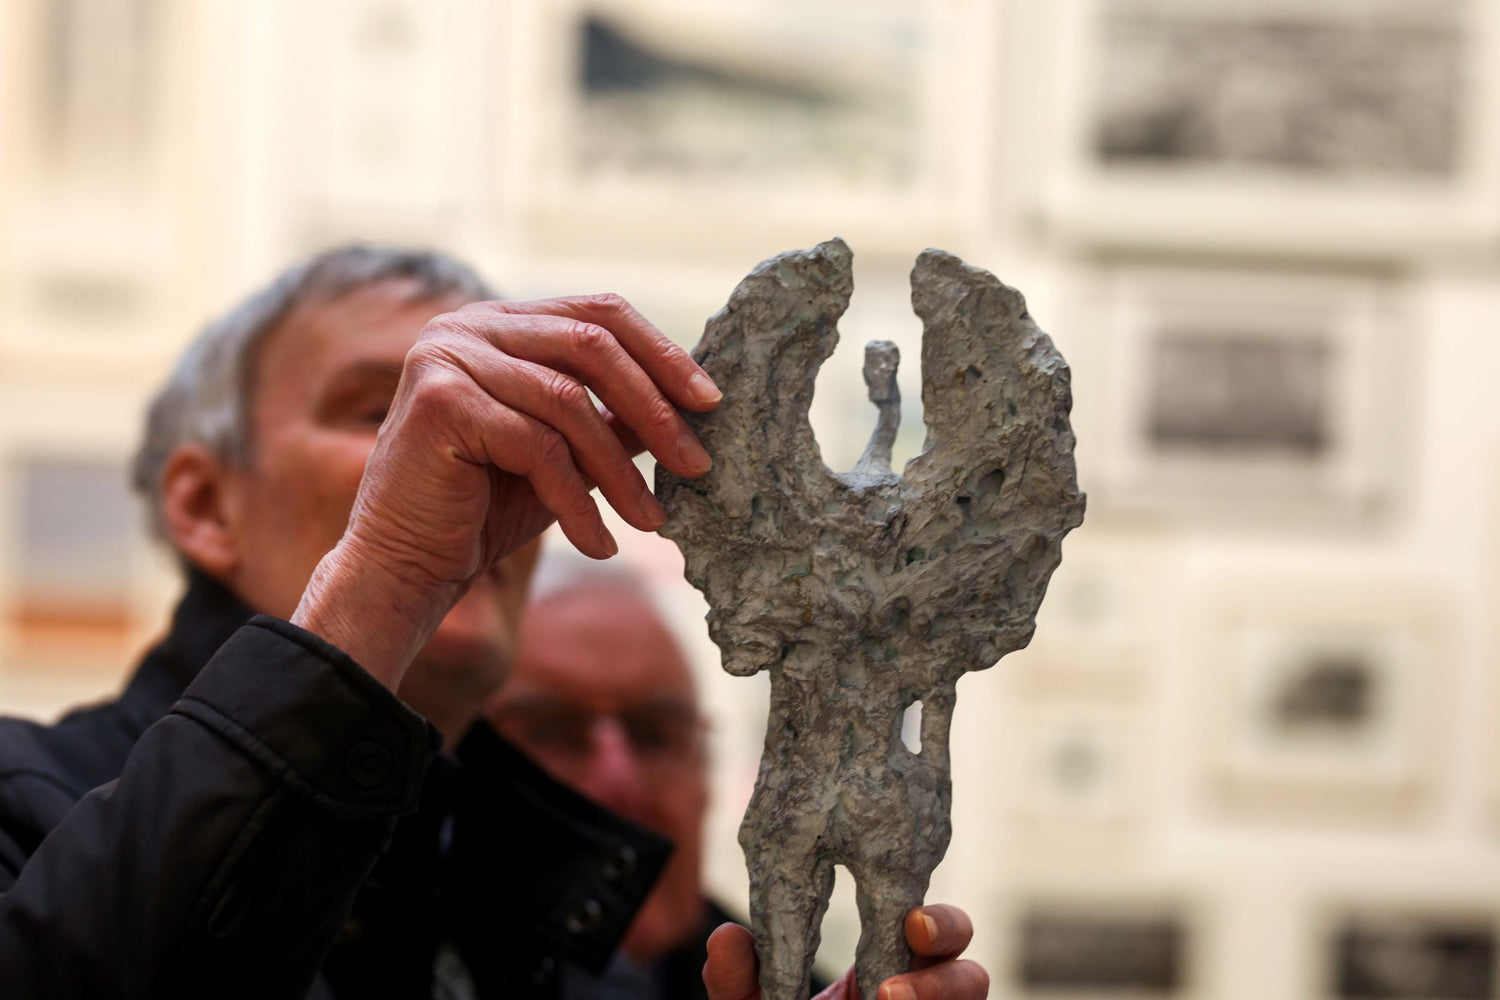 In the foreground, in the centre third of the image, there is an abstract sculpture of a figure with wings. To the left a man with grey hair and black jacket gently touches the sculpture with his thumb and index and middle finger. The background is blurred but we can see the vague outline of artworks hung on a wall. 